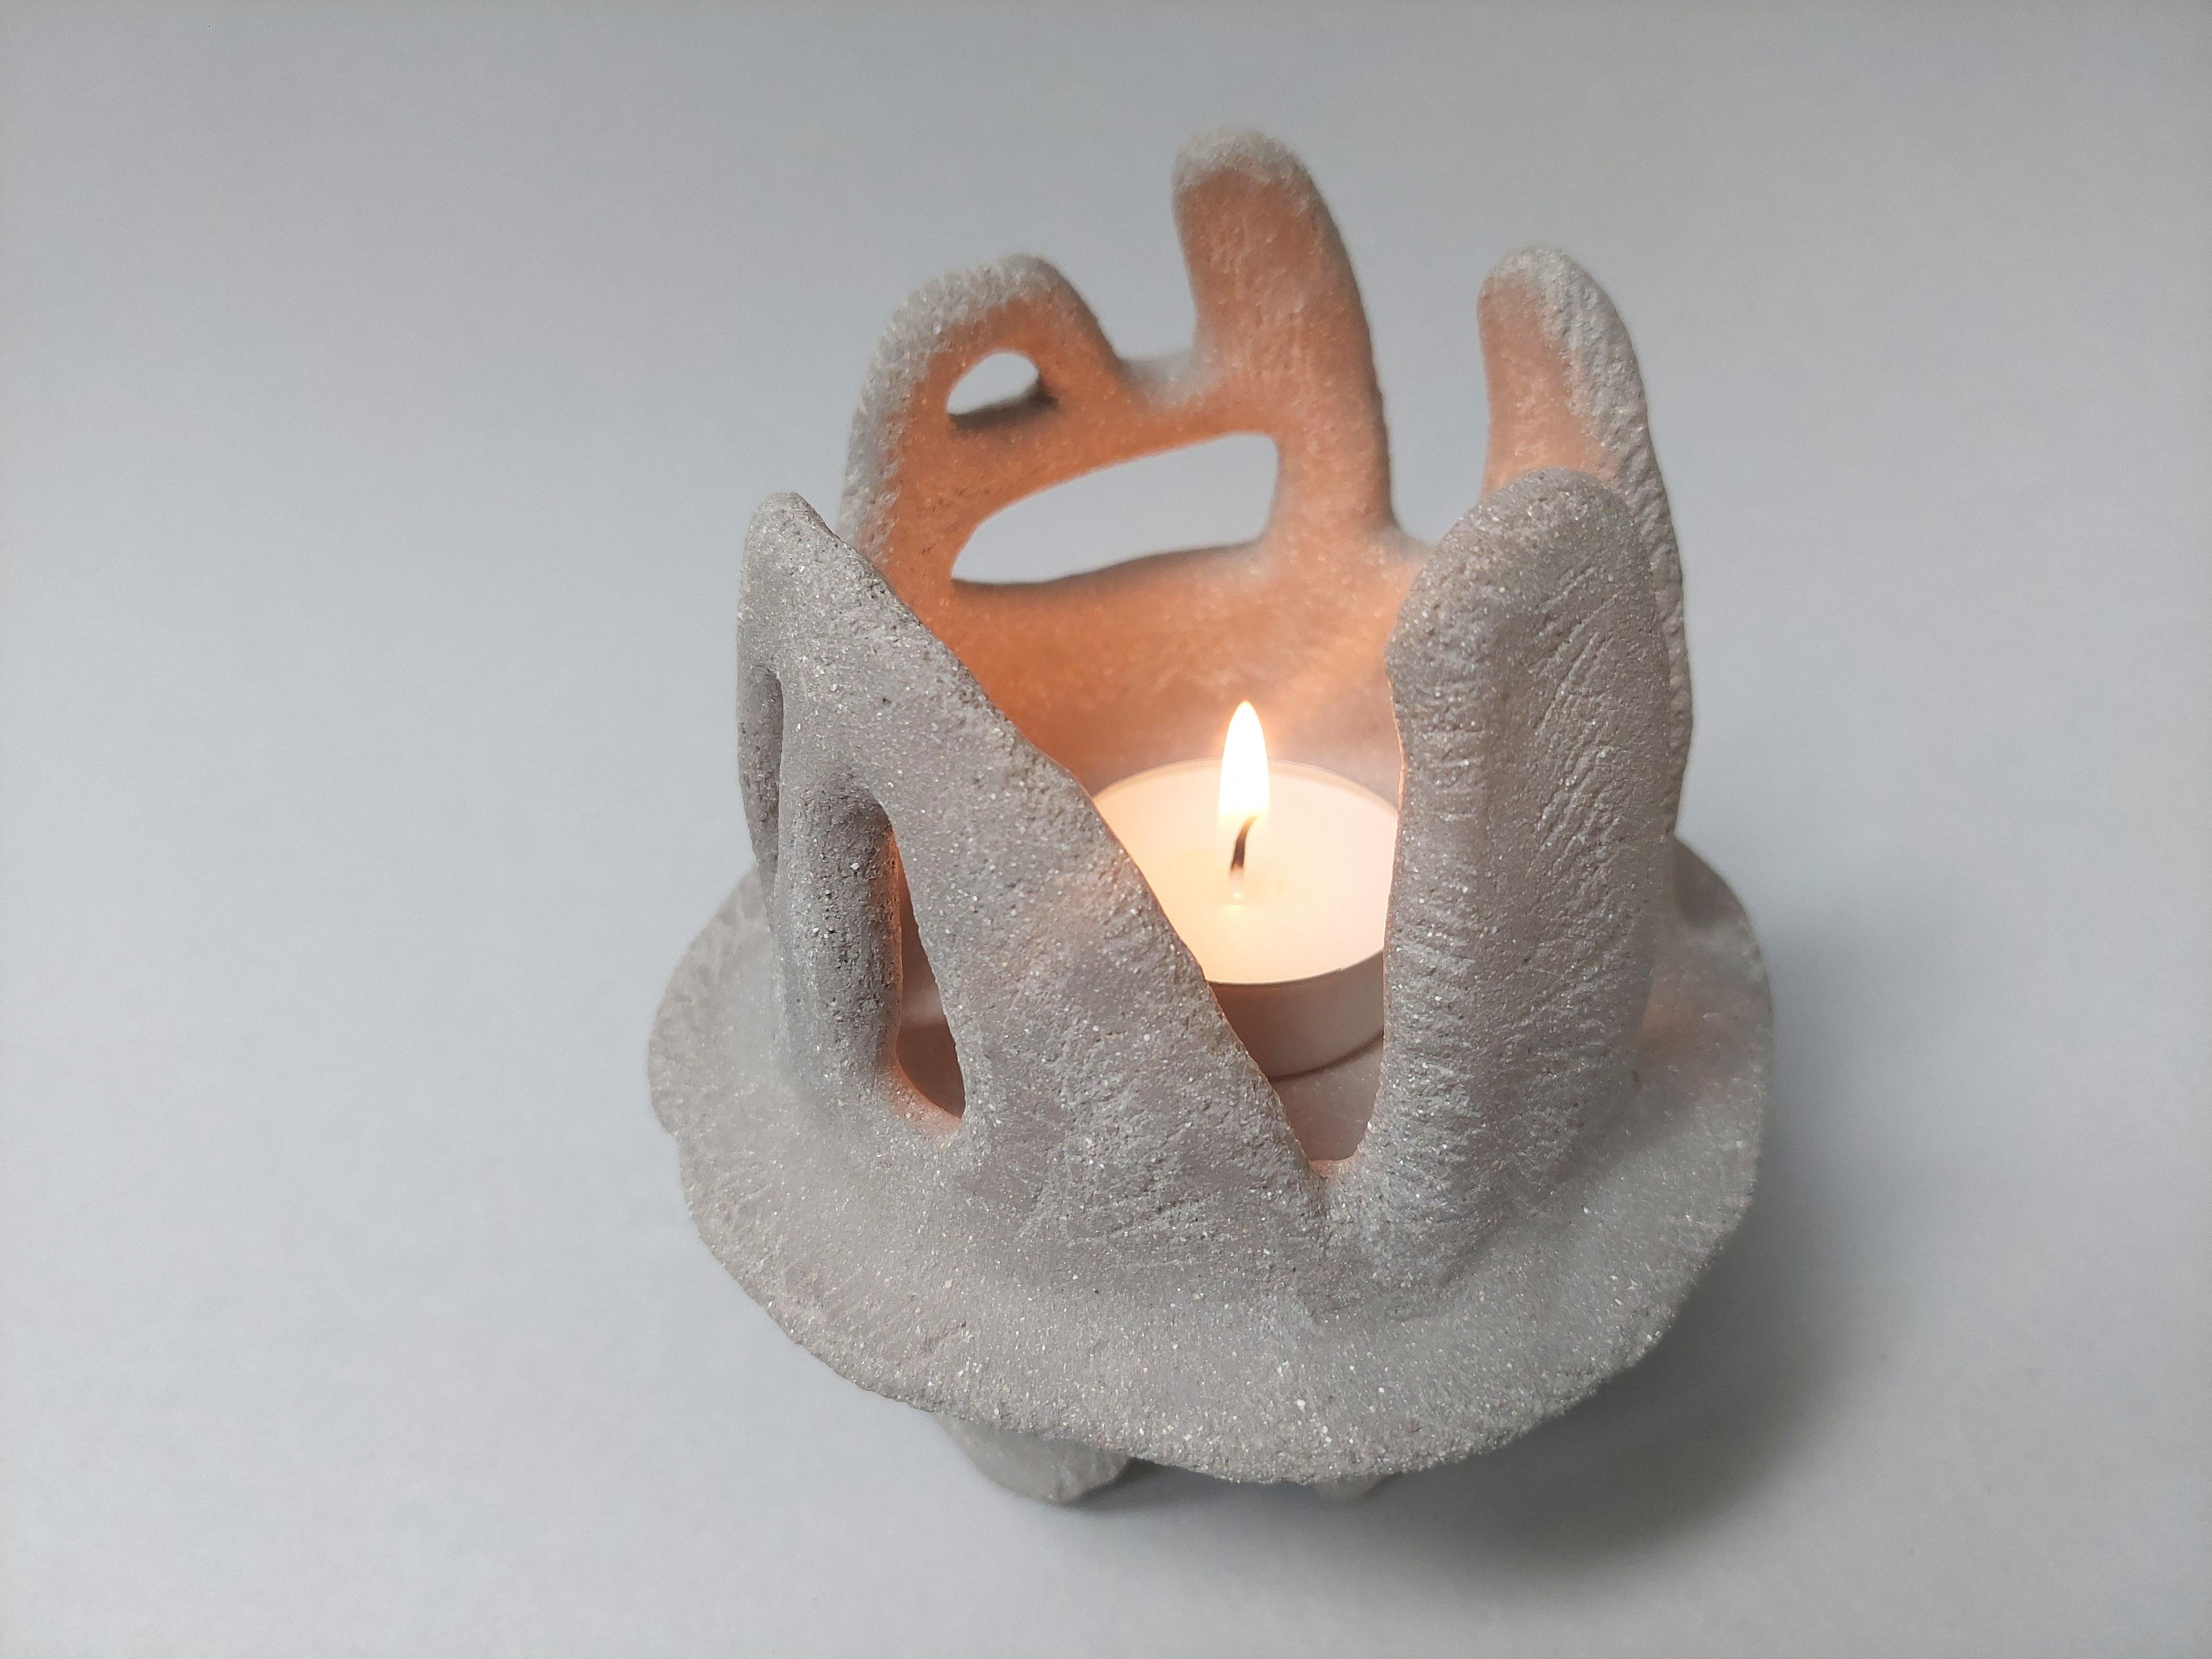 This ceramic sculpture resembles an ancient object. It has a stone texture and rounded plasticity. Inside the sculpture is a place for fire. When the fire burns, the sculpture comes to life. You see a warm light inside and a cold shadow outside. It